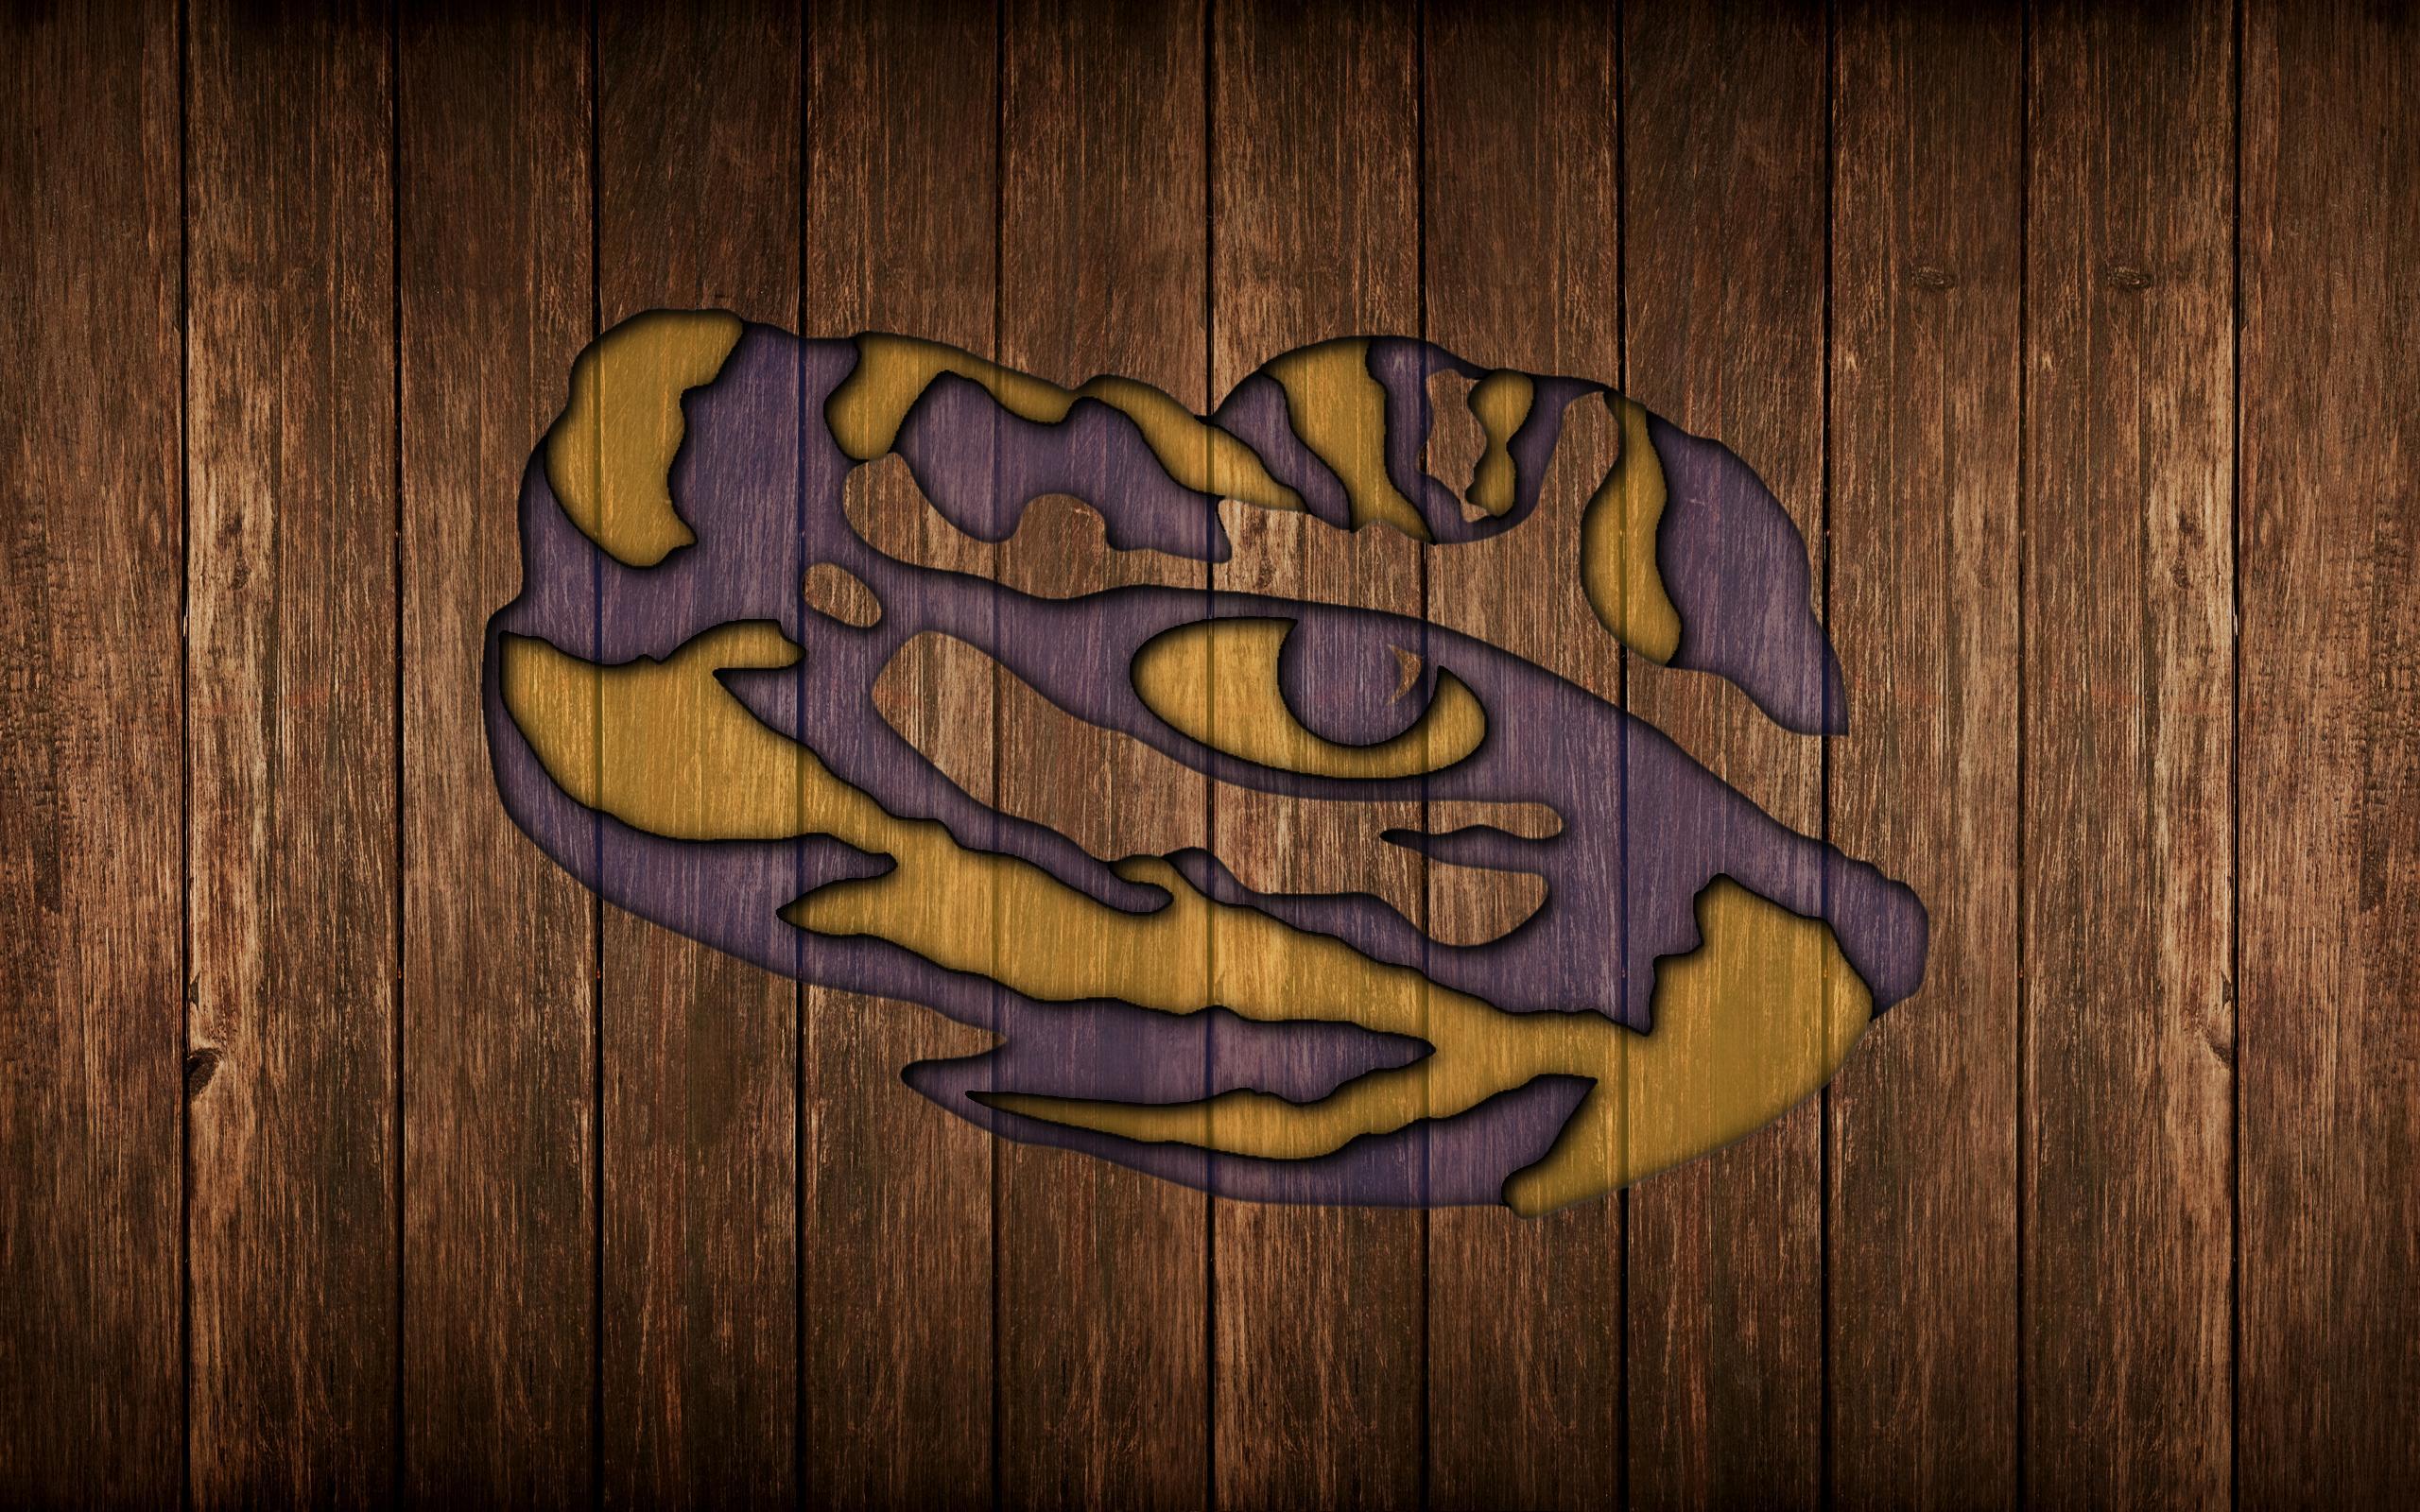 Some new LSU wallpaper I have been working on